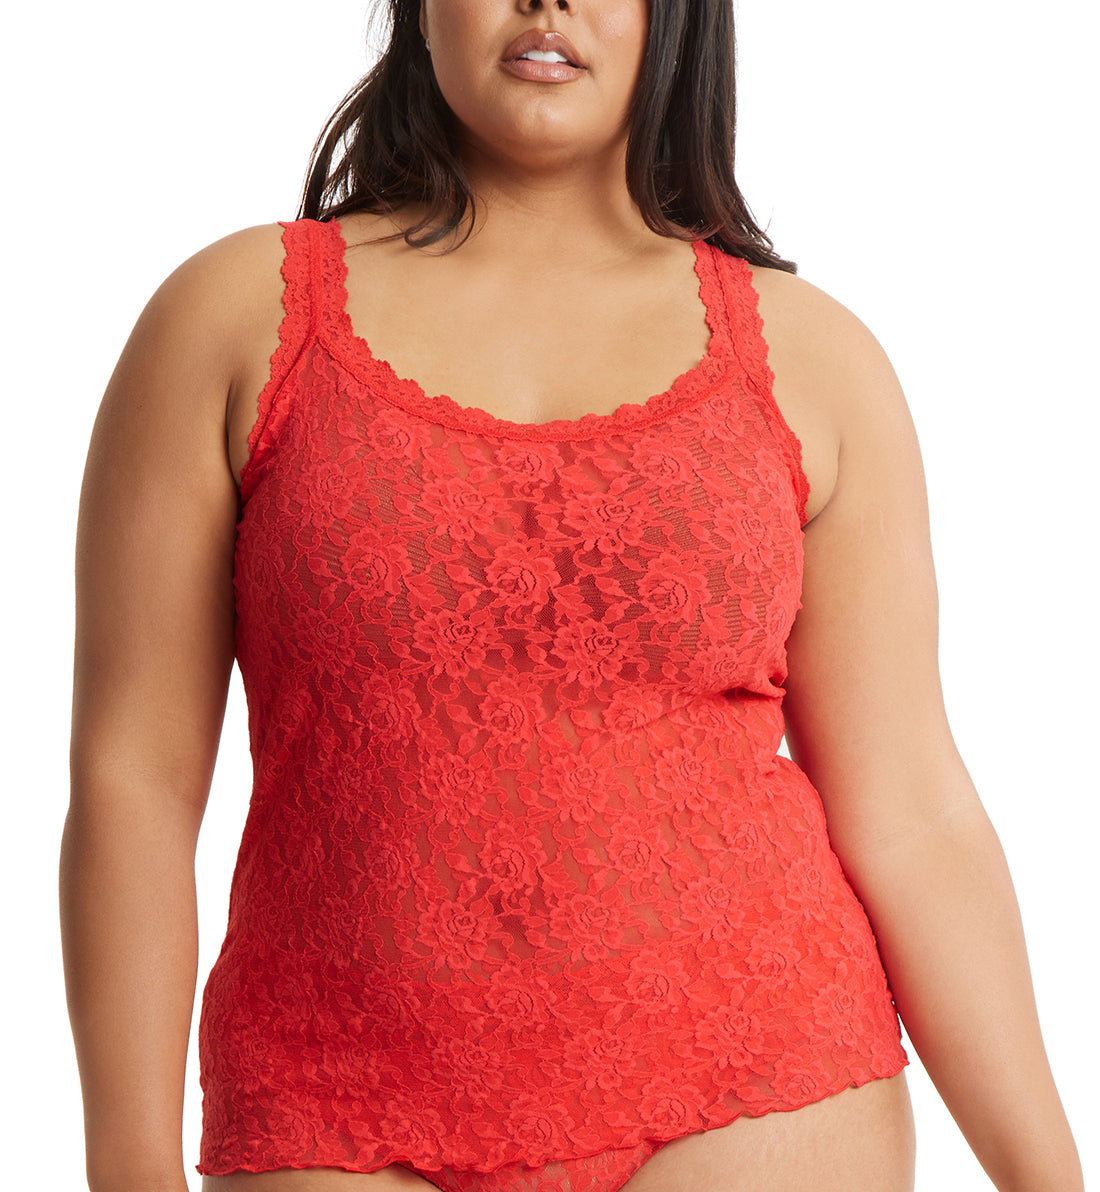 Hanky Panky Signature Lace Unlined Camisole PLUS (1390LX),1X,Deep Sea Coral - Deep Sea Coral,1X